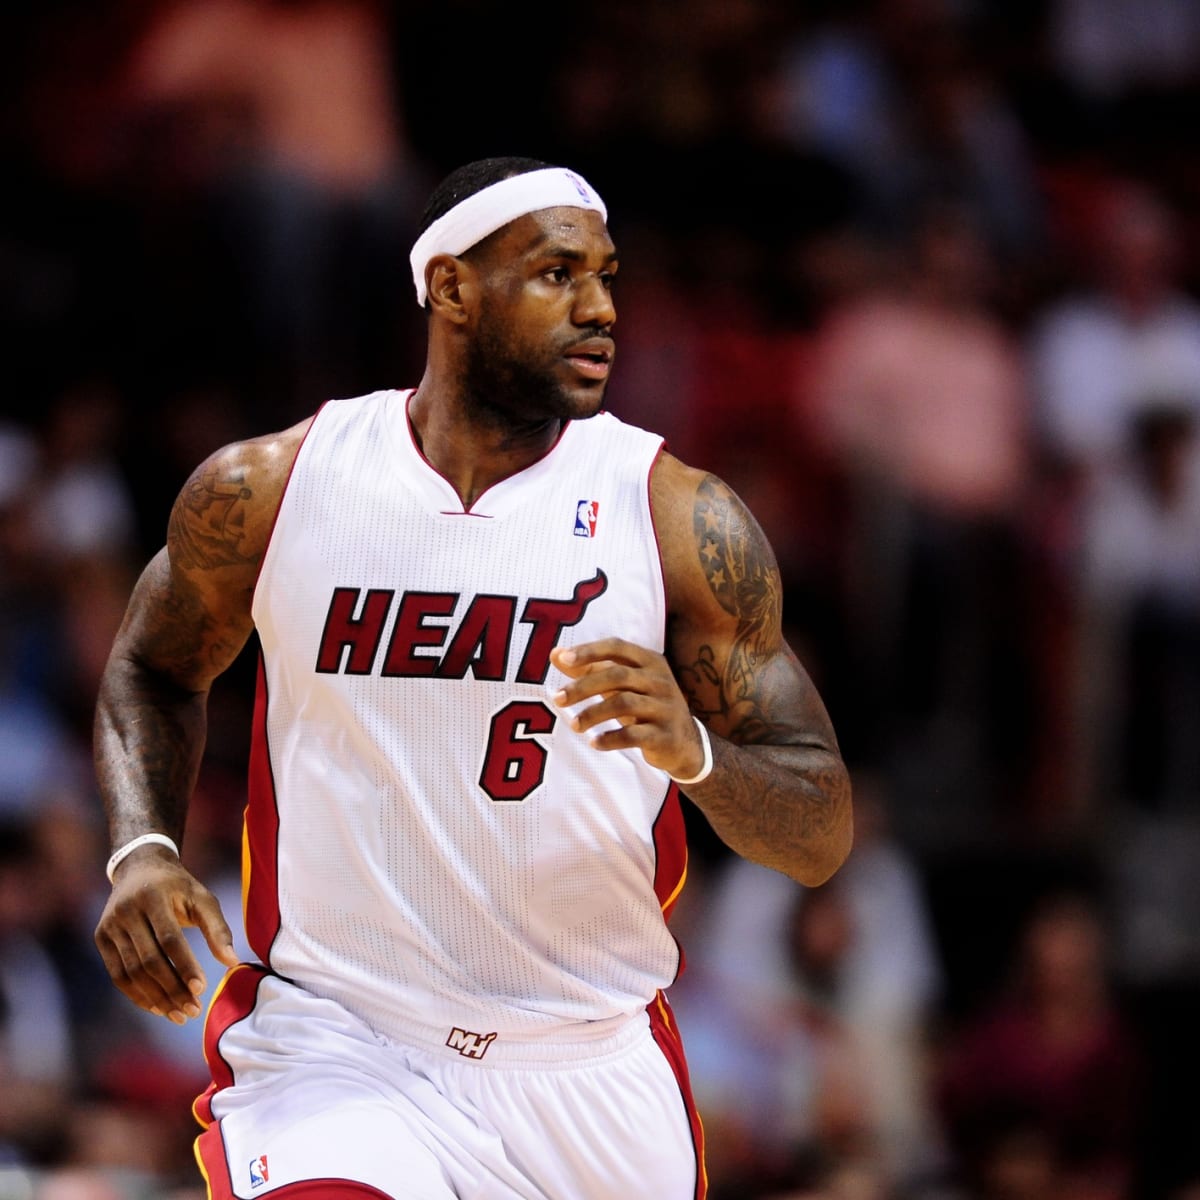 LeBron James game-worn jersey sells for $46,000 - Sports Illustrated